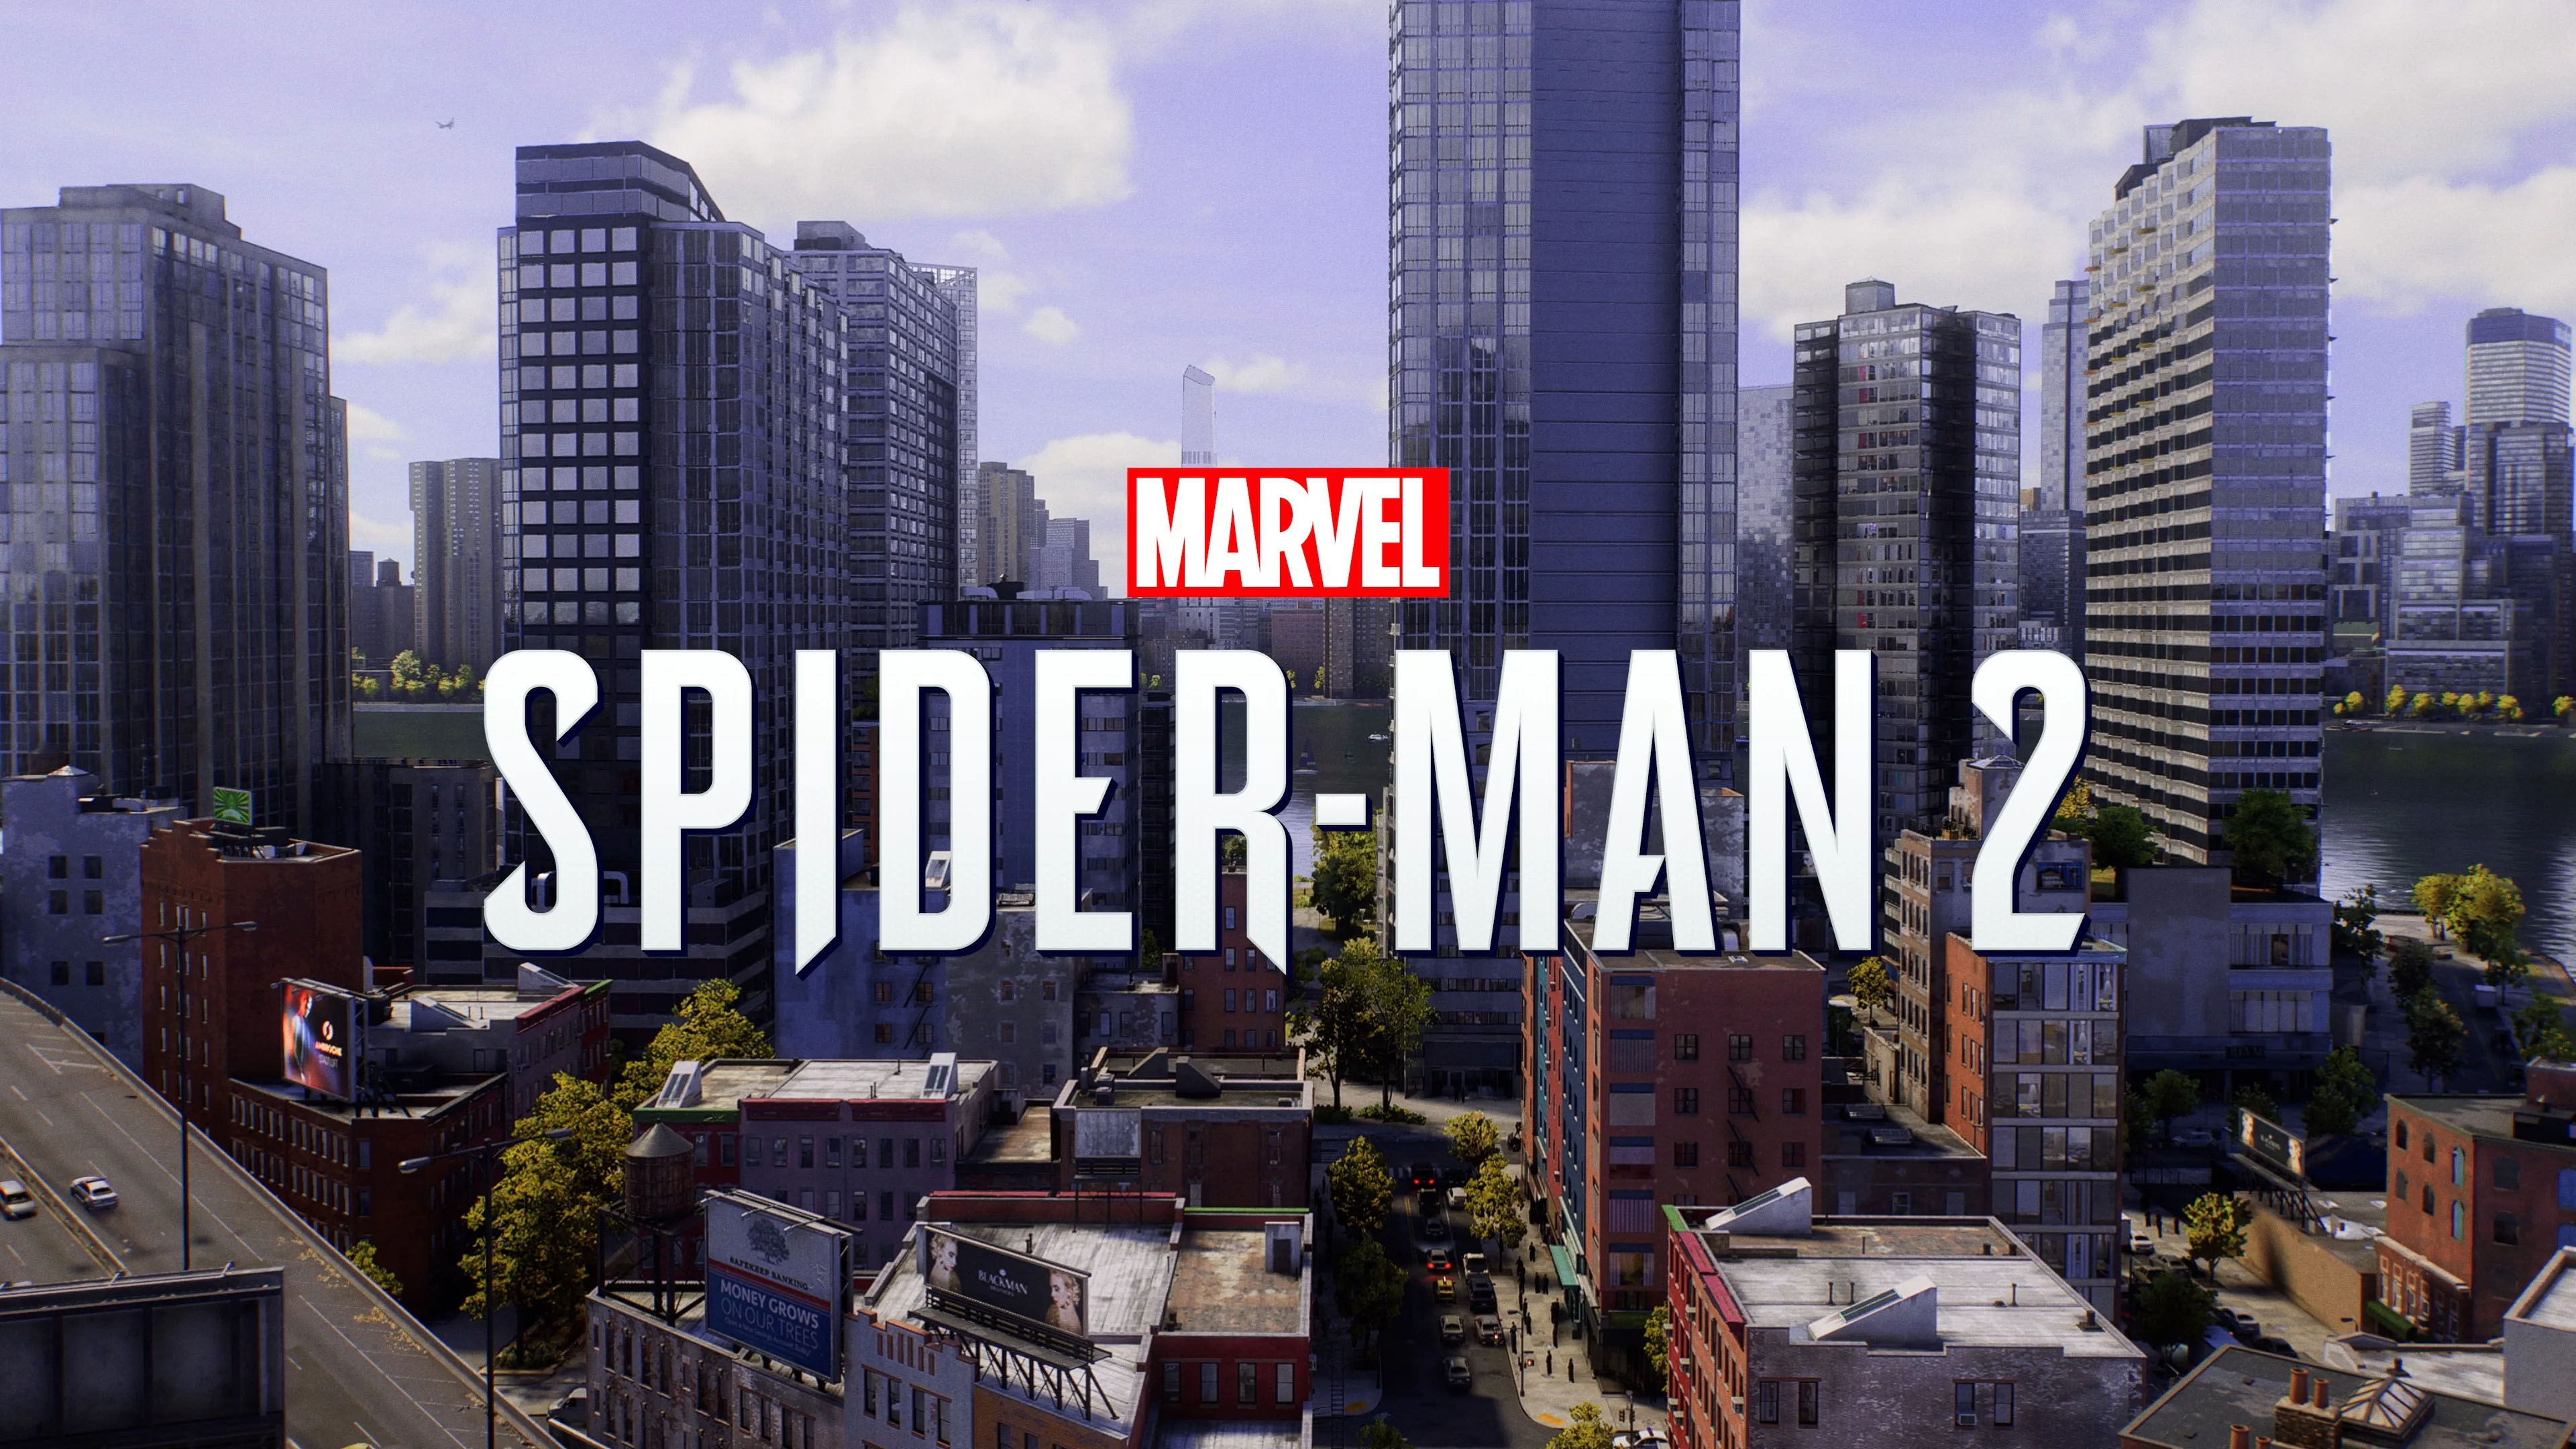 You'll Need Marvel's Spider-Man 2's Digital Deluxe Edition for